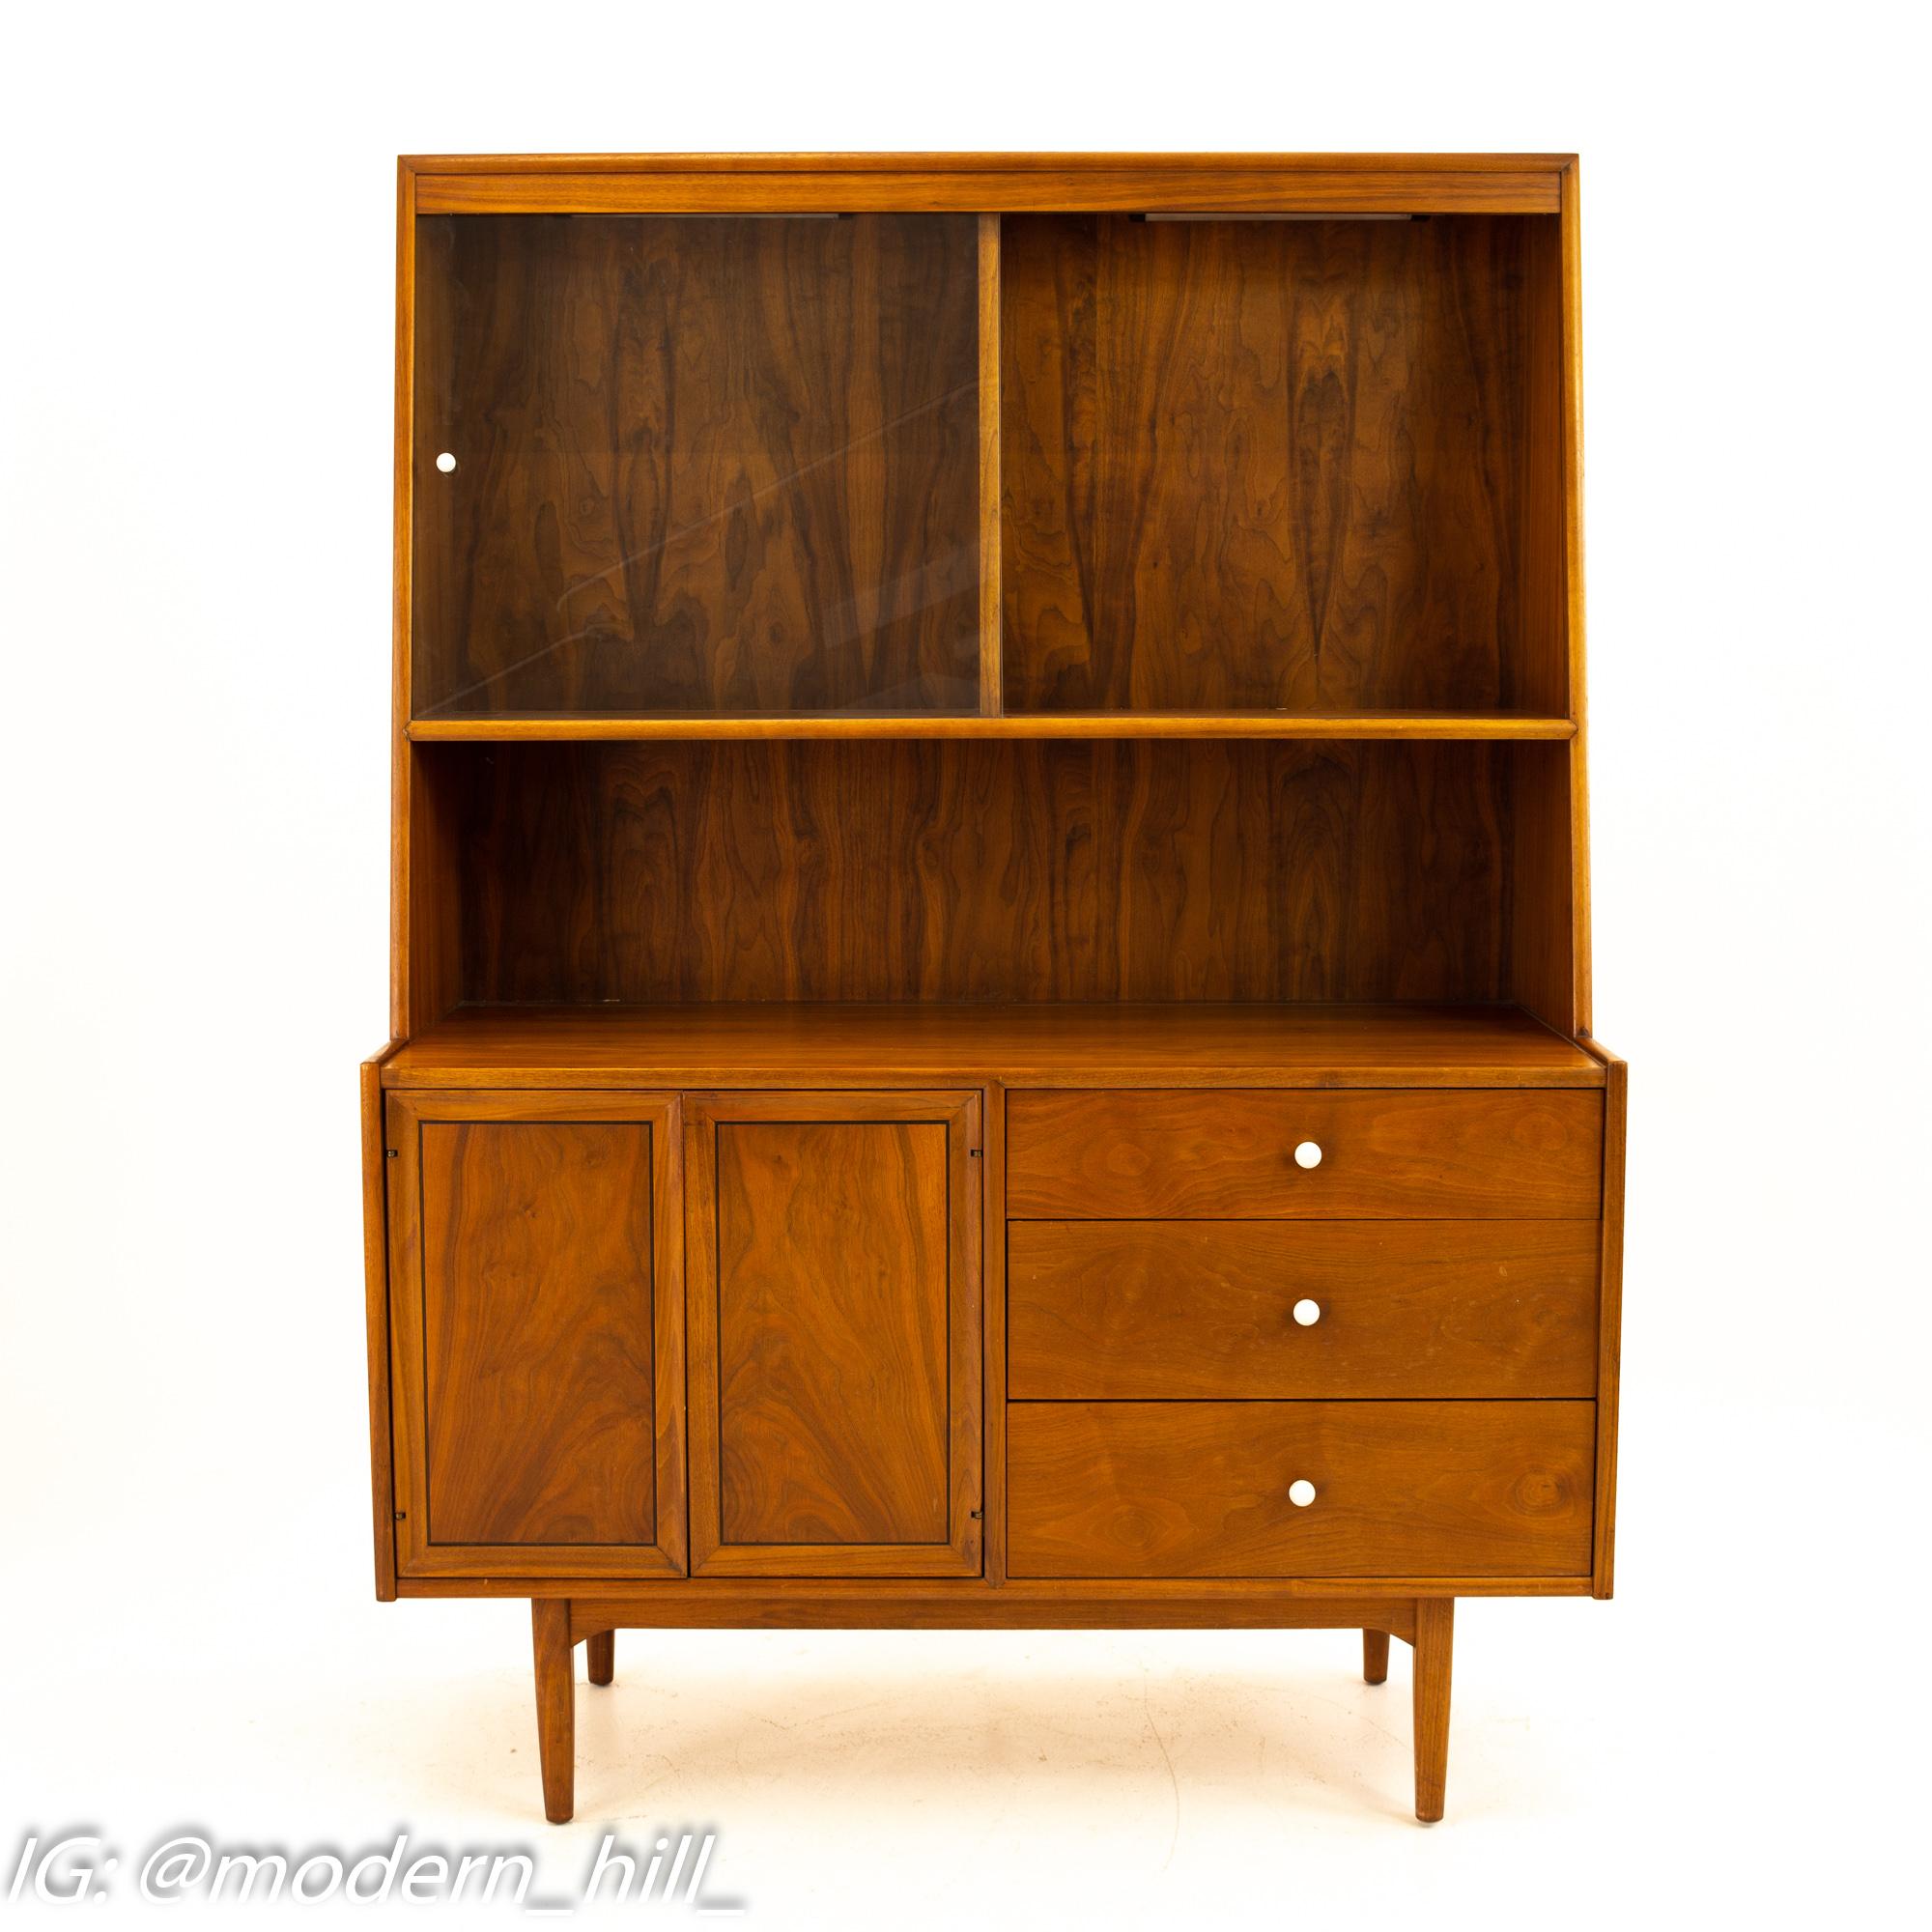 Kipp Stewart for Drexel Declaration Mid Century Walnut Buffet & Hutch

Buffet measures: 48.5 wide x 20 deep x 67.25

All pieces of furniture can be had in what we call restored vintage condition. That means the piece is restored upon purchase so